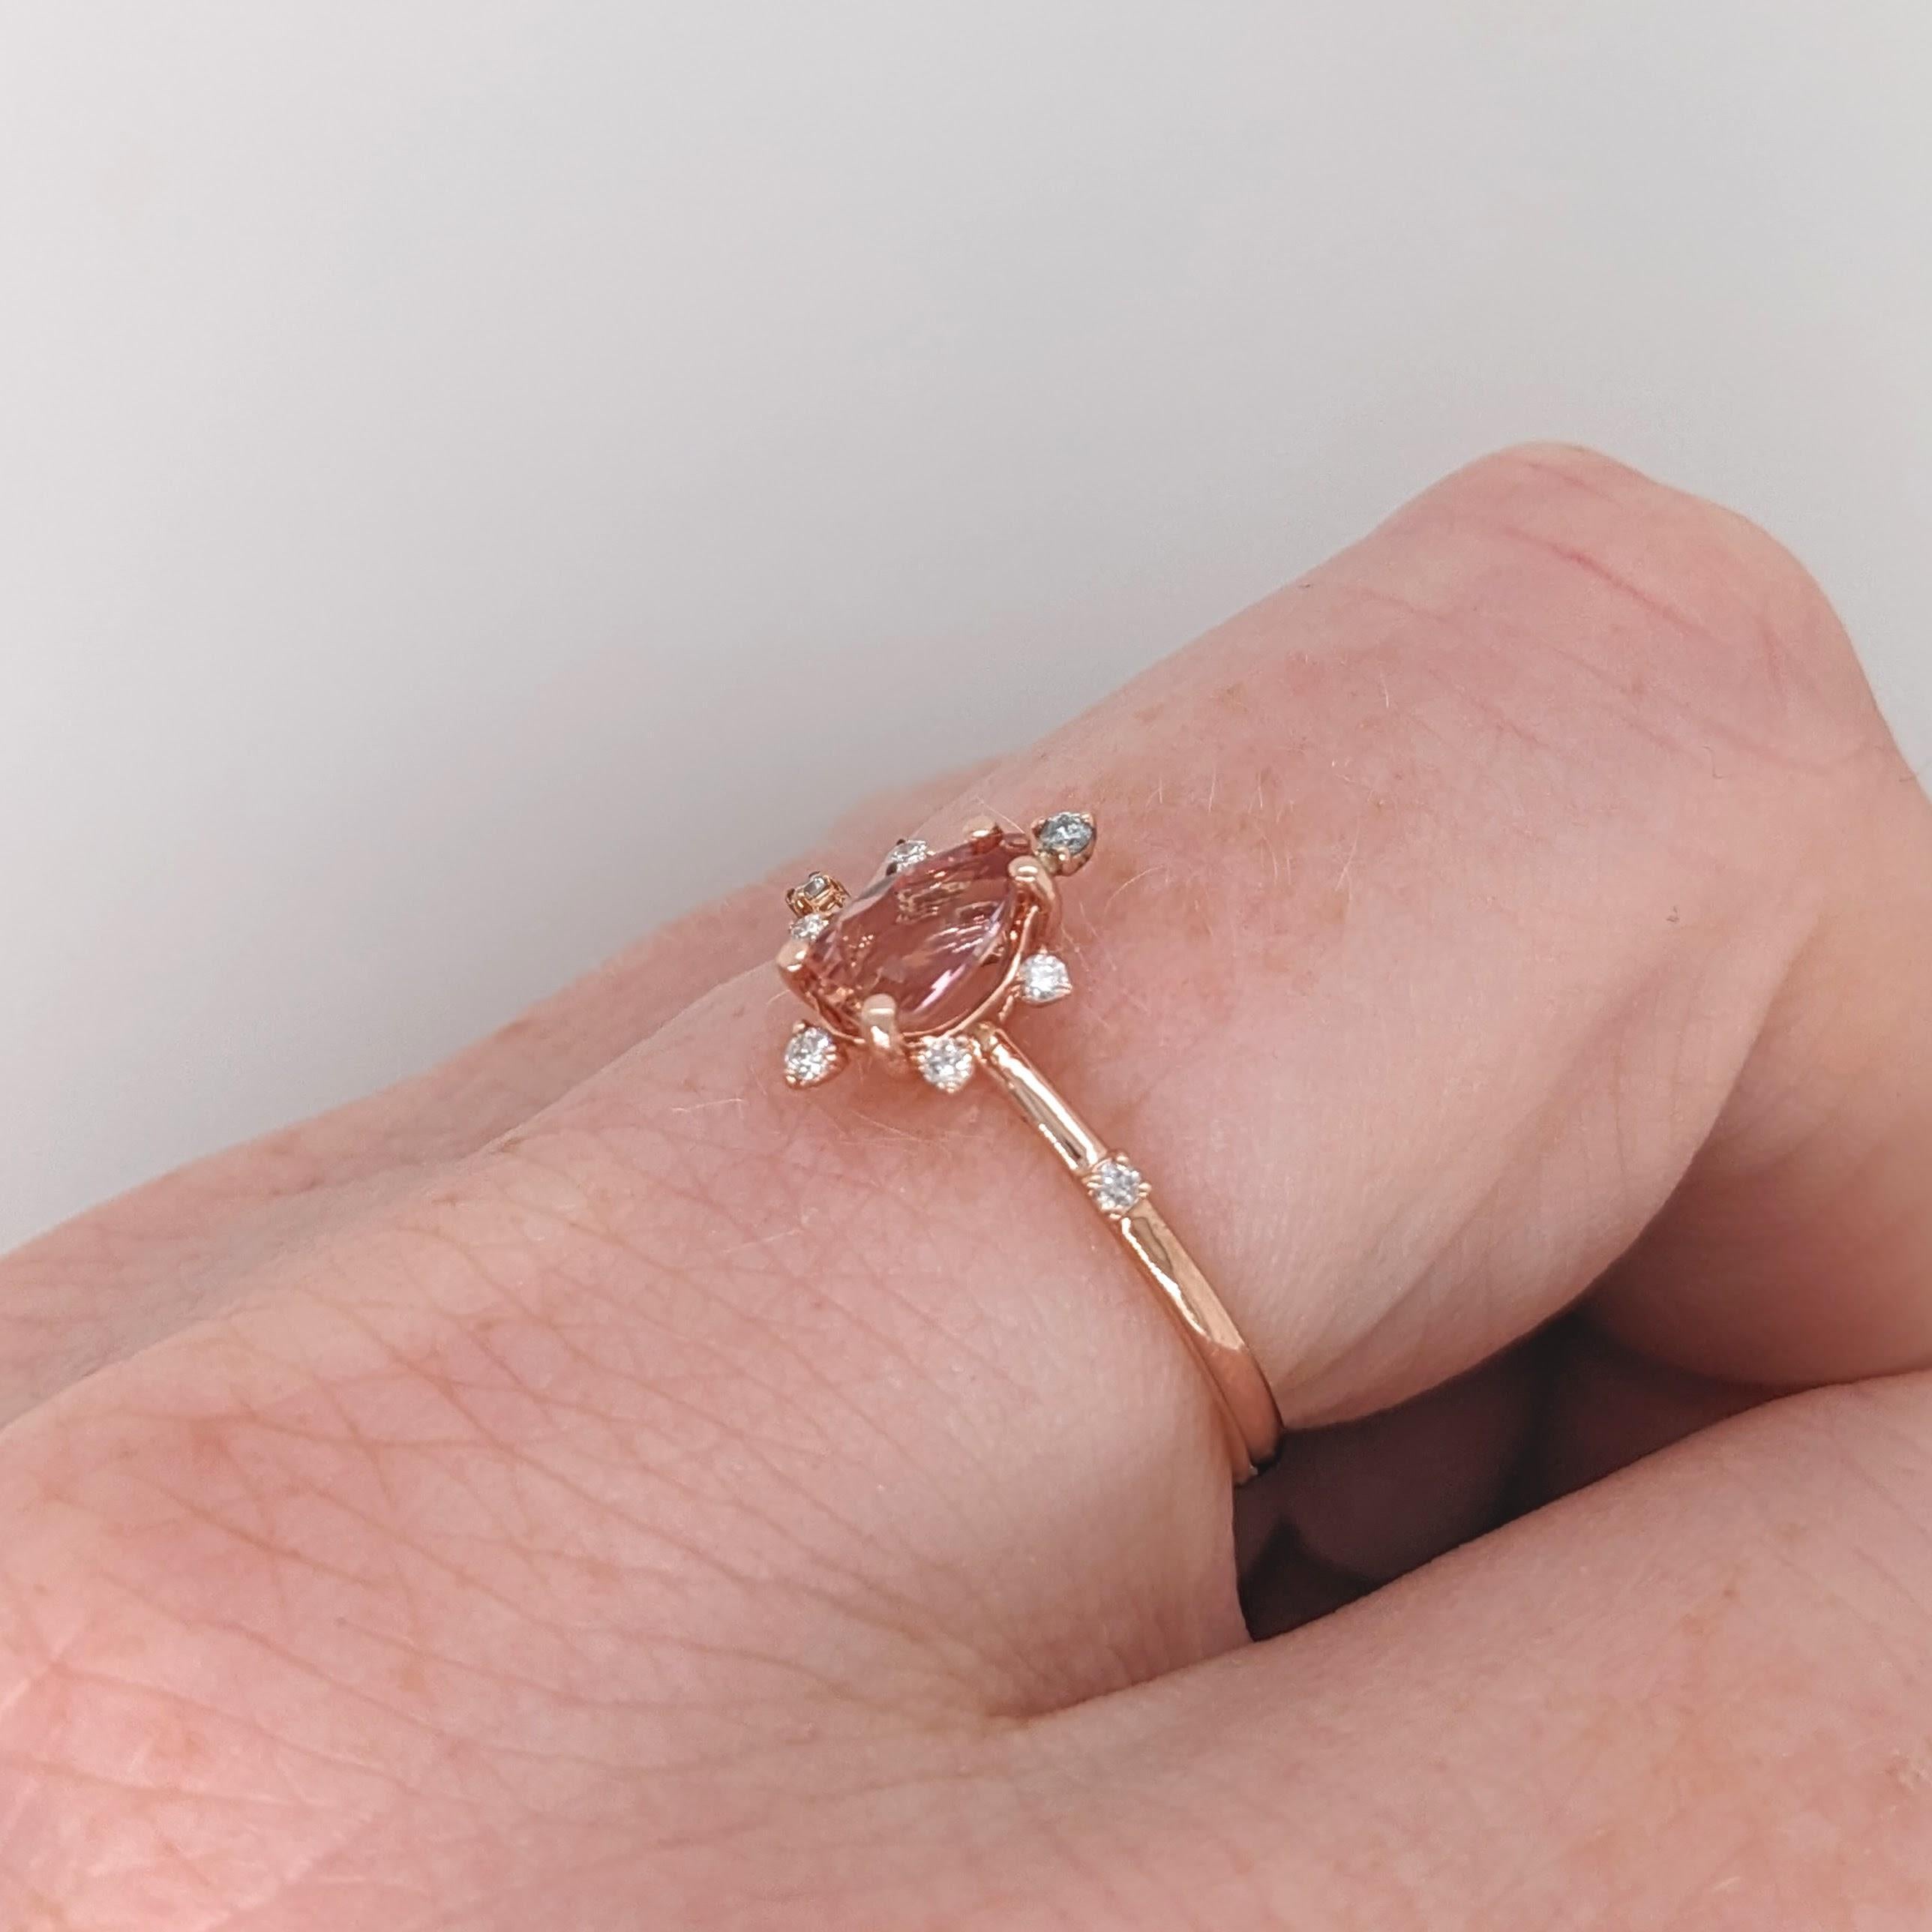 Modern Imperial Topaz Ring w Natural Diamonds in Solid 14K Rose Gold Pear shape 7x5mm